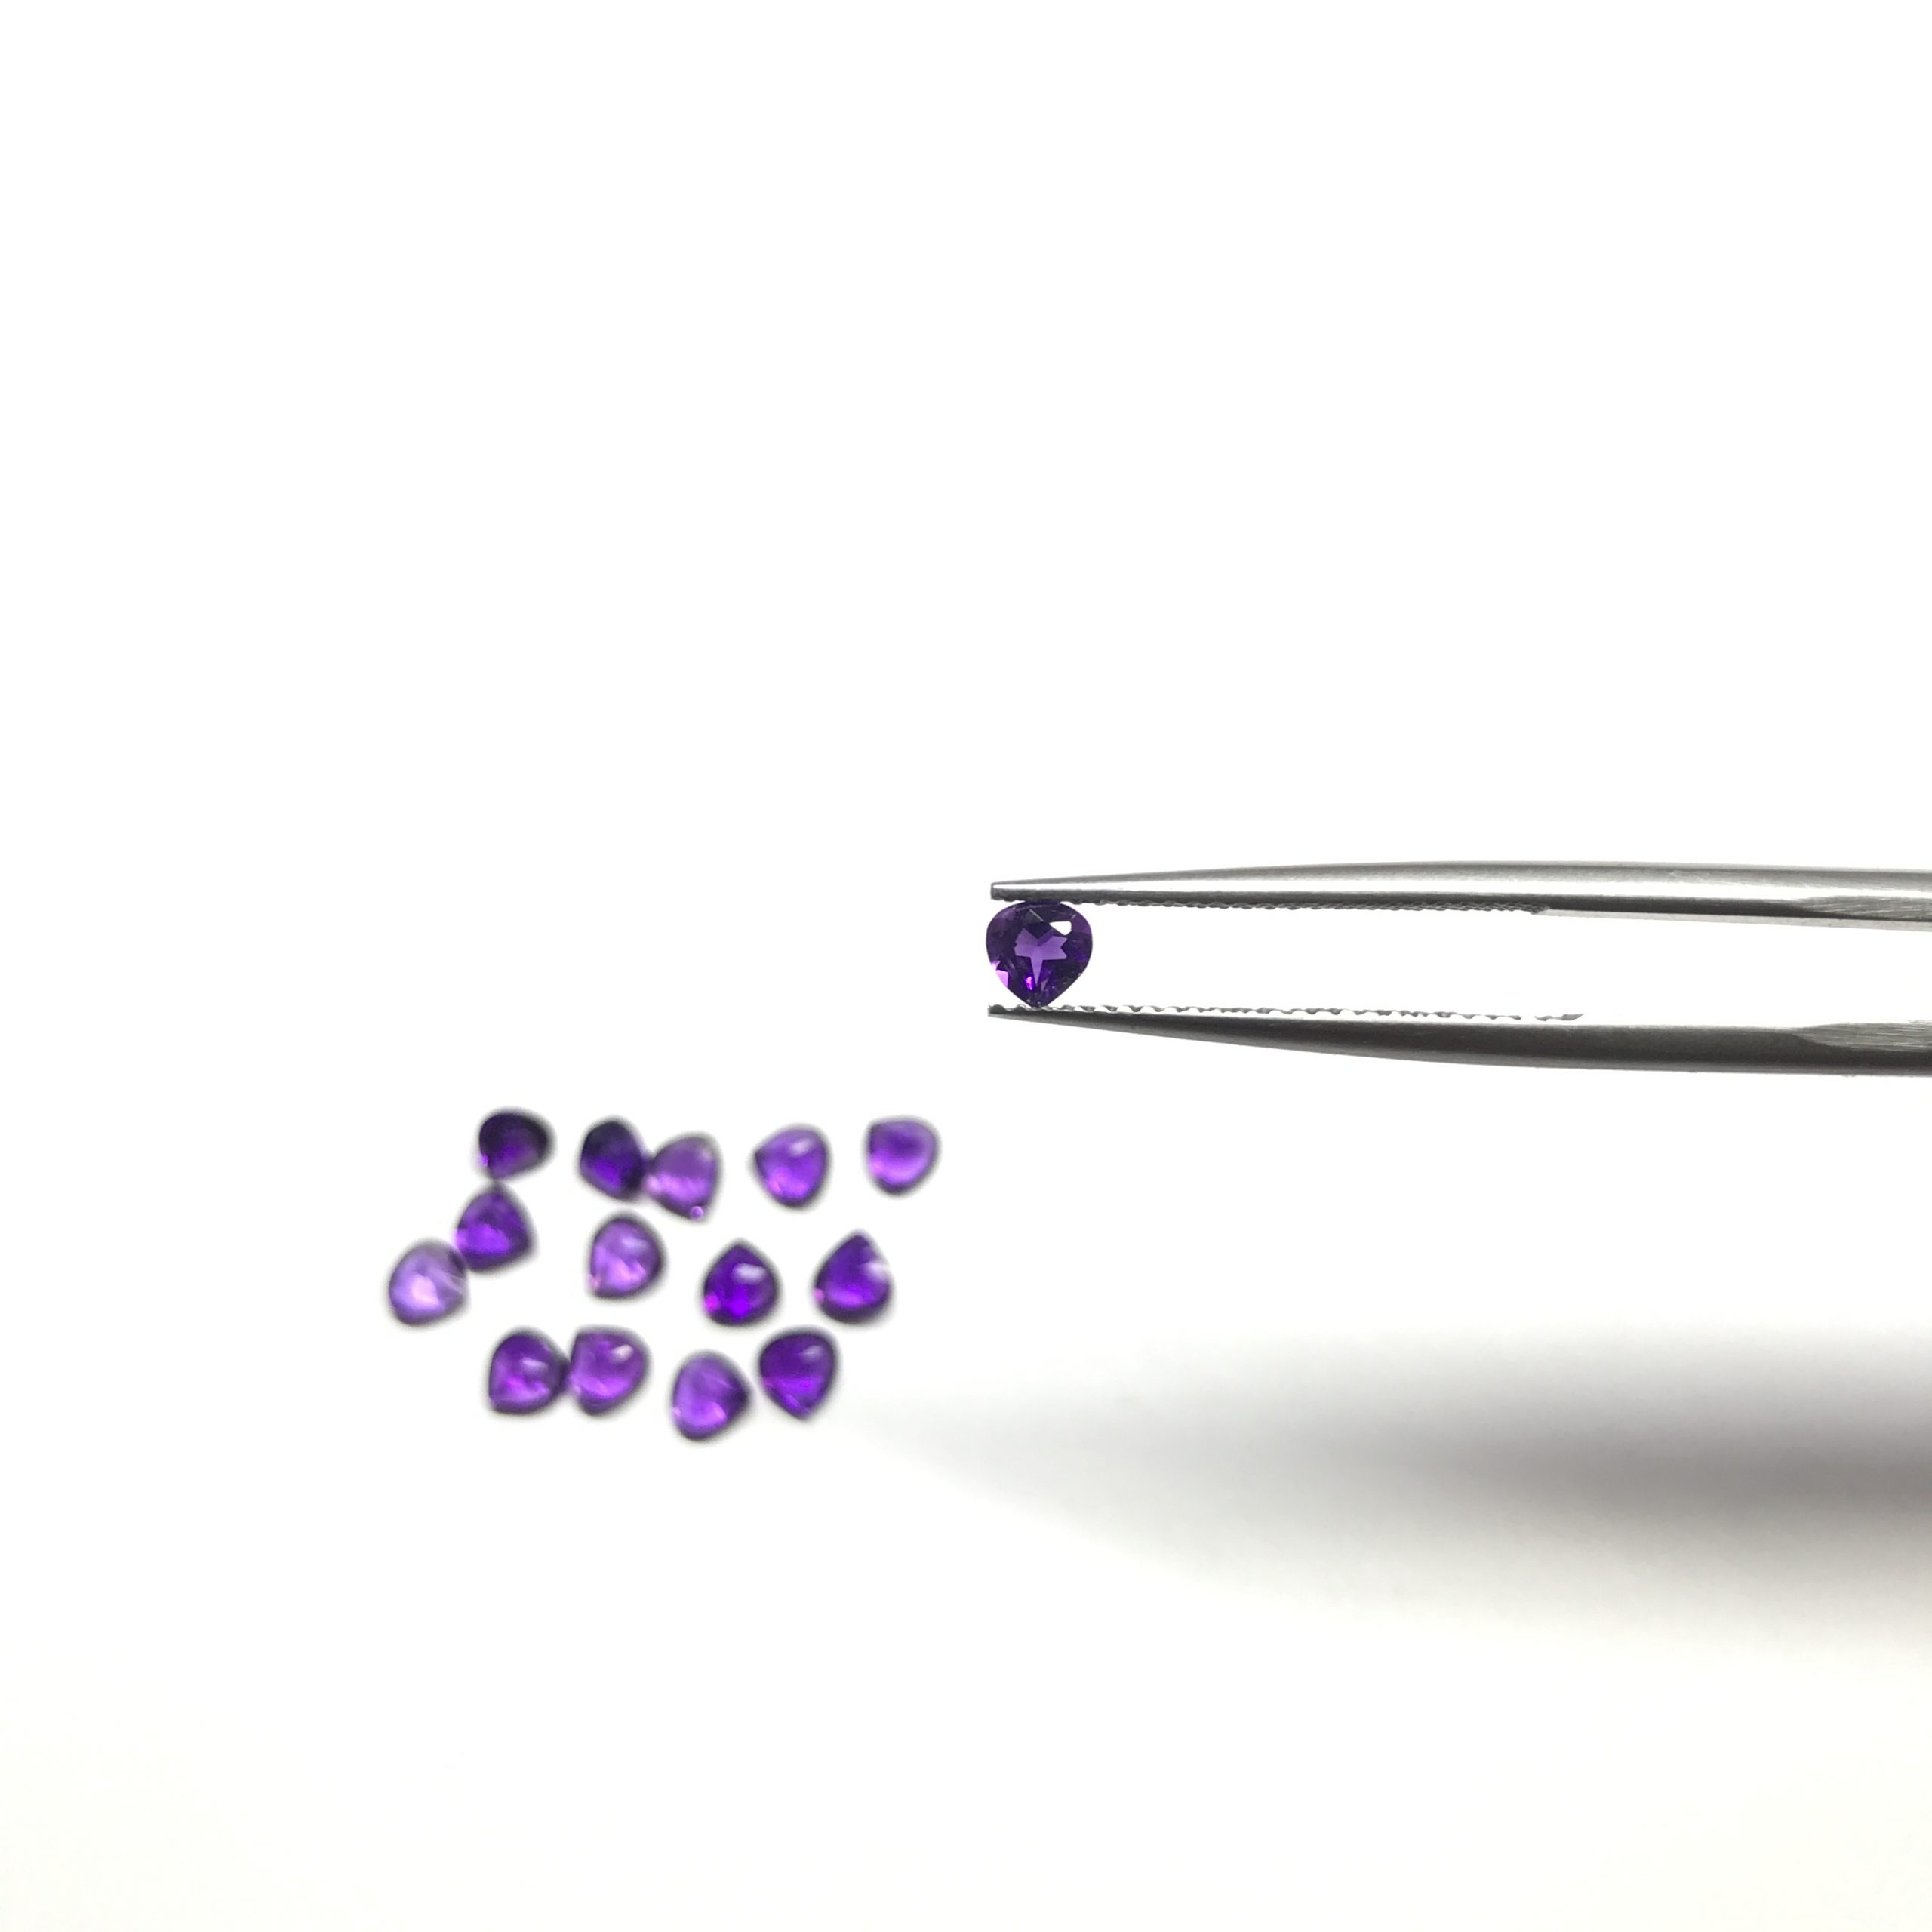 3mm Natural Amethyst Heart Faceted Gemstone